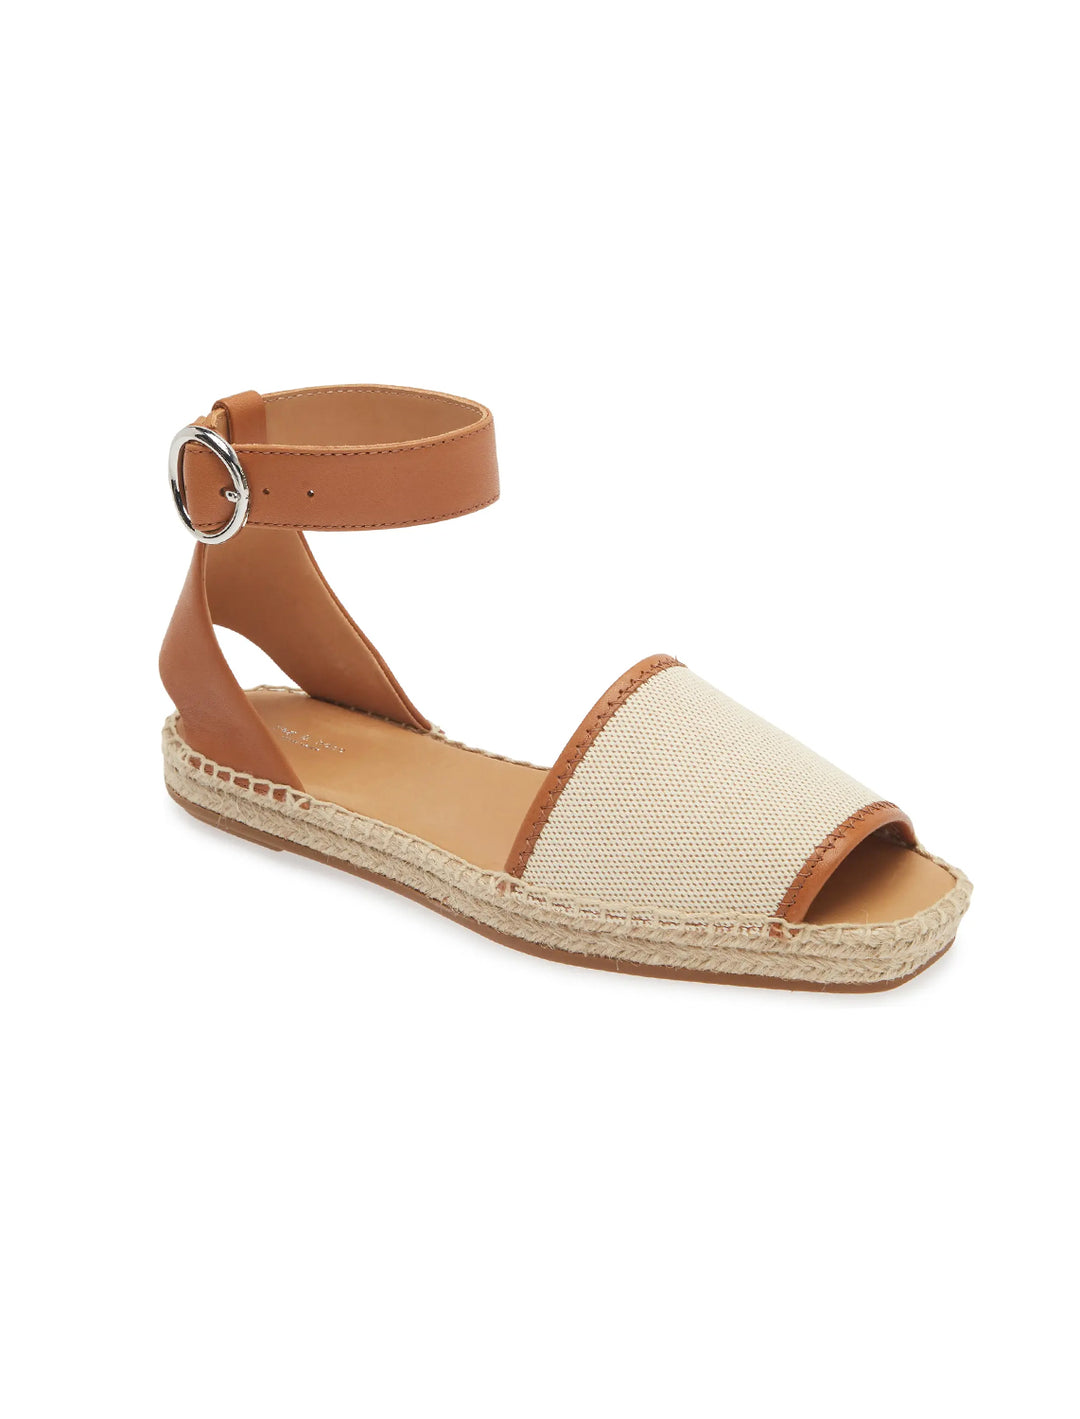 Front angle view of Rag & Bone's anteros peep toe espadrille in natural.